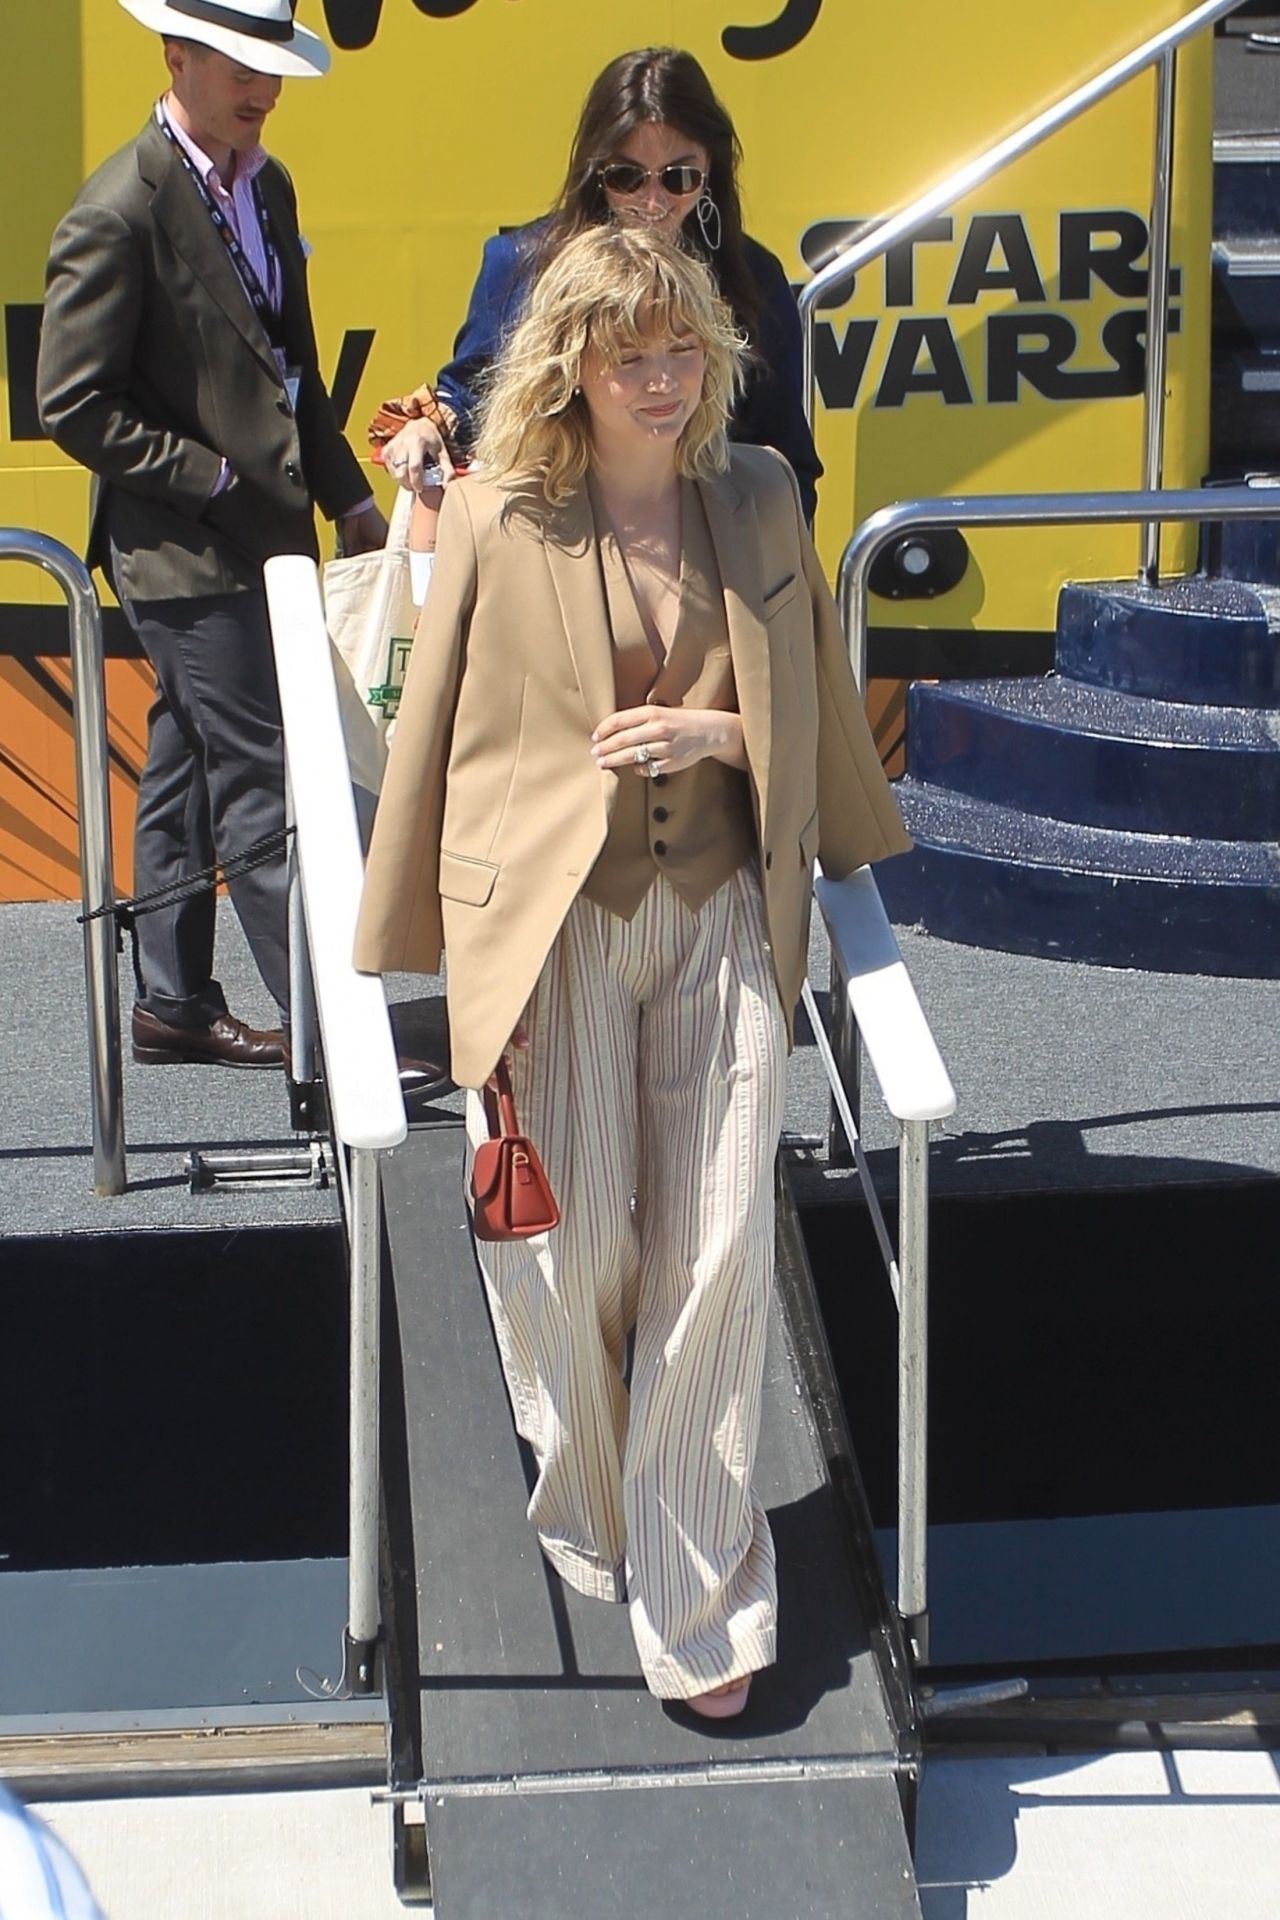 maddie-hasson-arrives-at-sdcc-2019-5.jpg